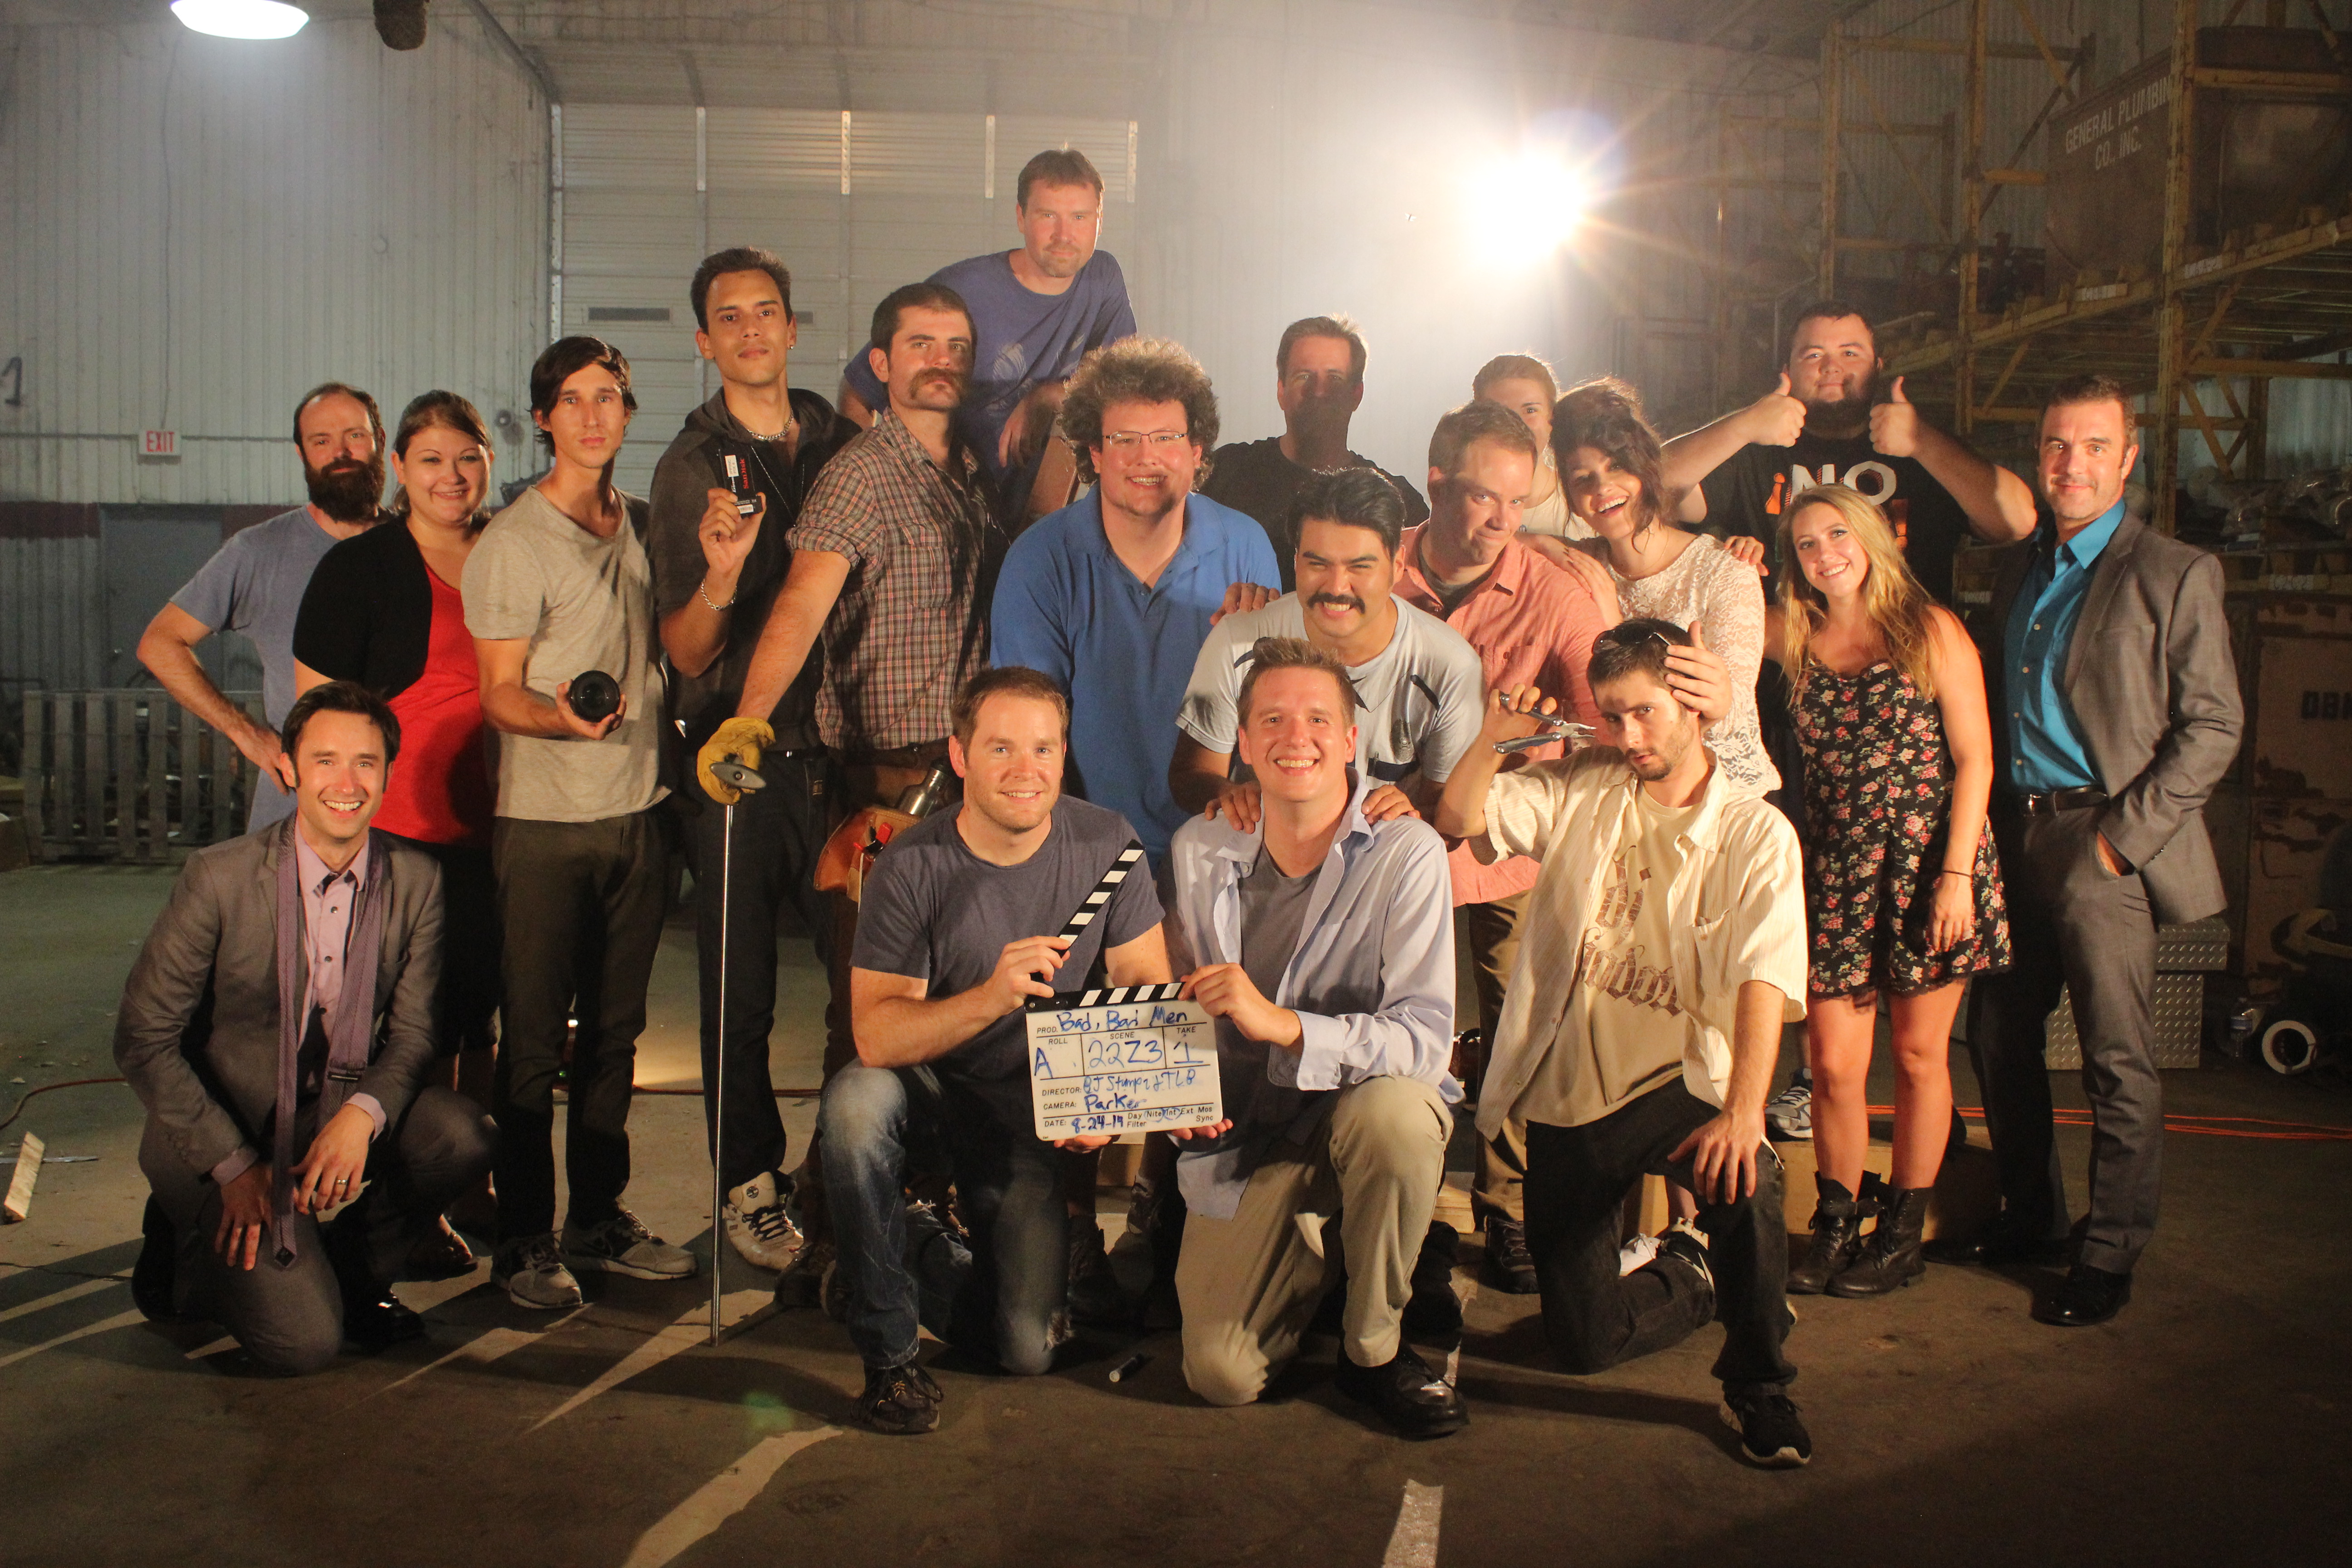 That's a wrap on BAD, BAD MEN!